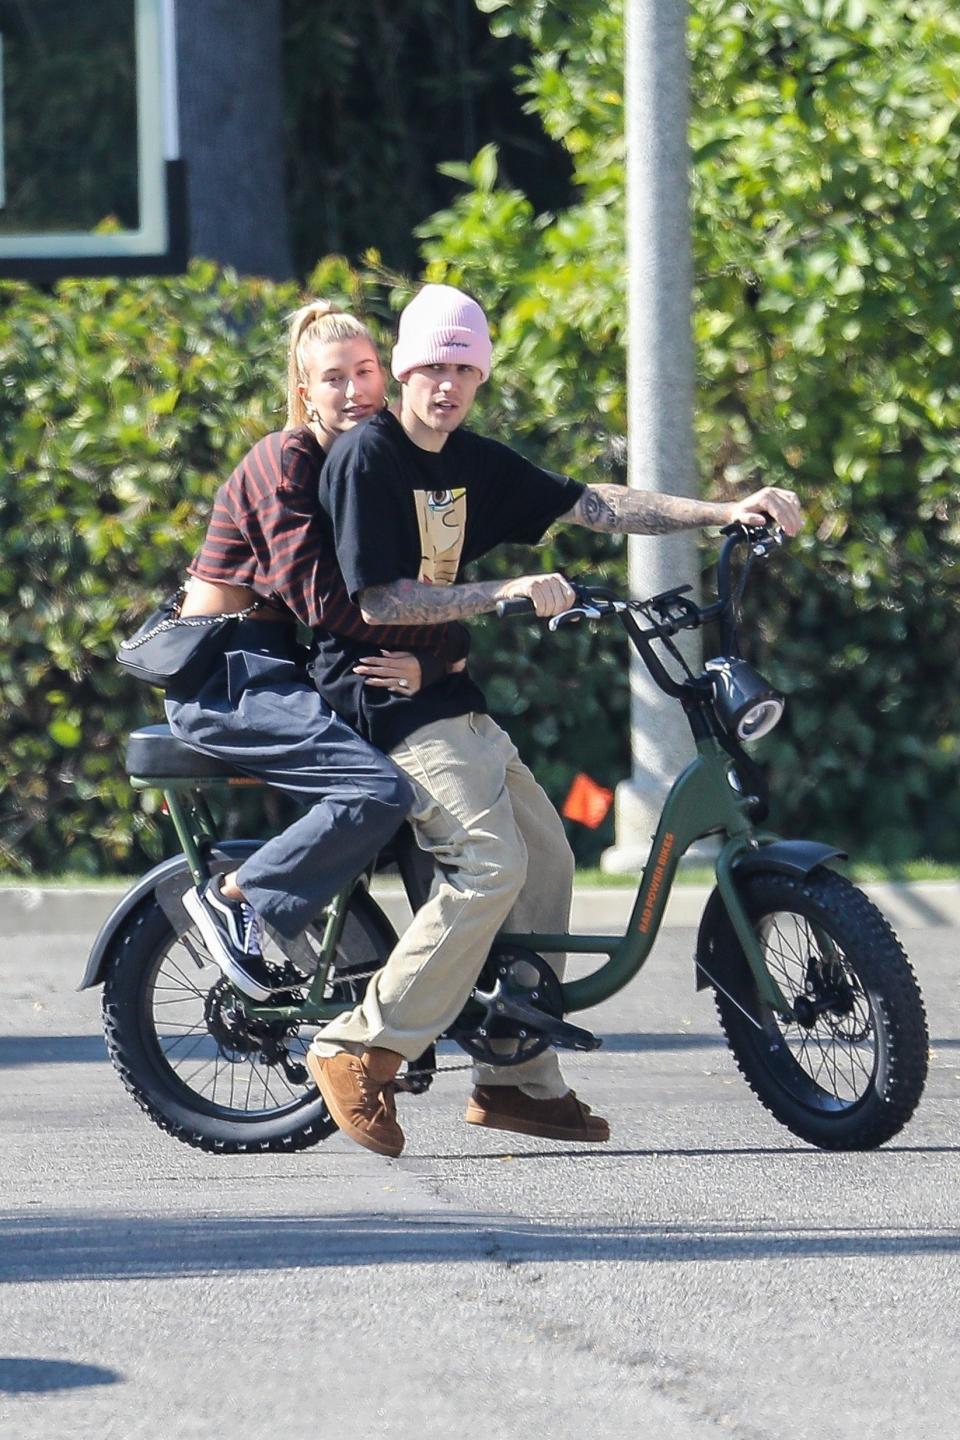 <h1 class="title">Justin Bieber and his wife Hailey Bieber enjoy a bike ride together on the same bike</h1><cite class="credit">Photo: Backgrid</cite>